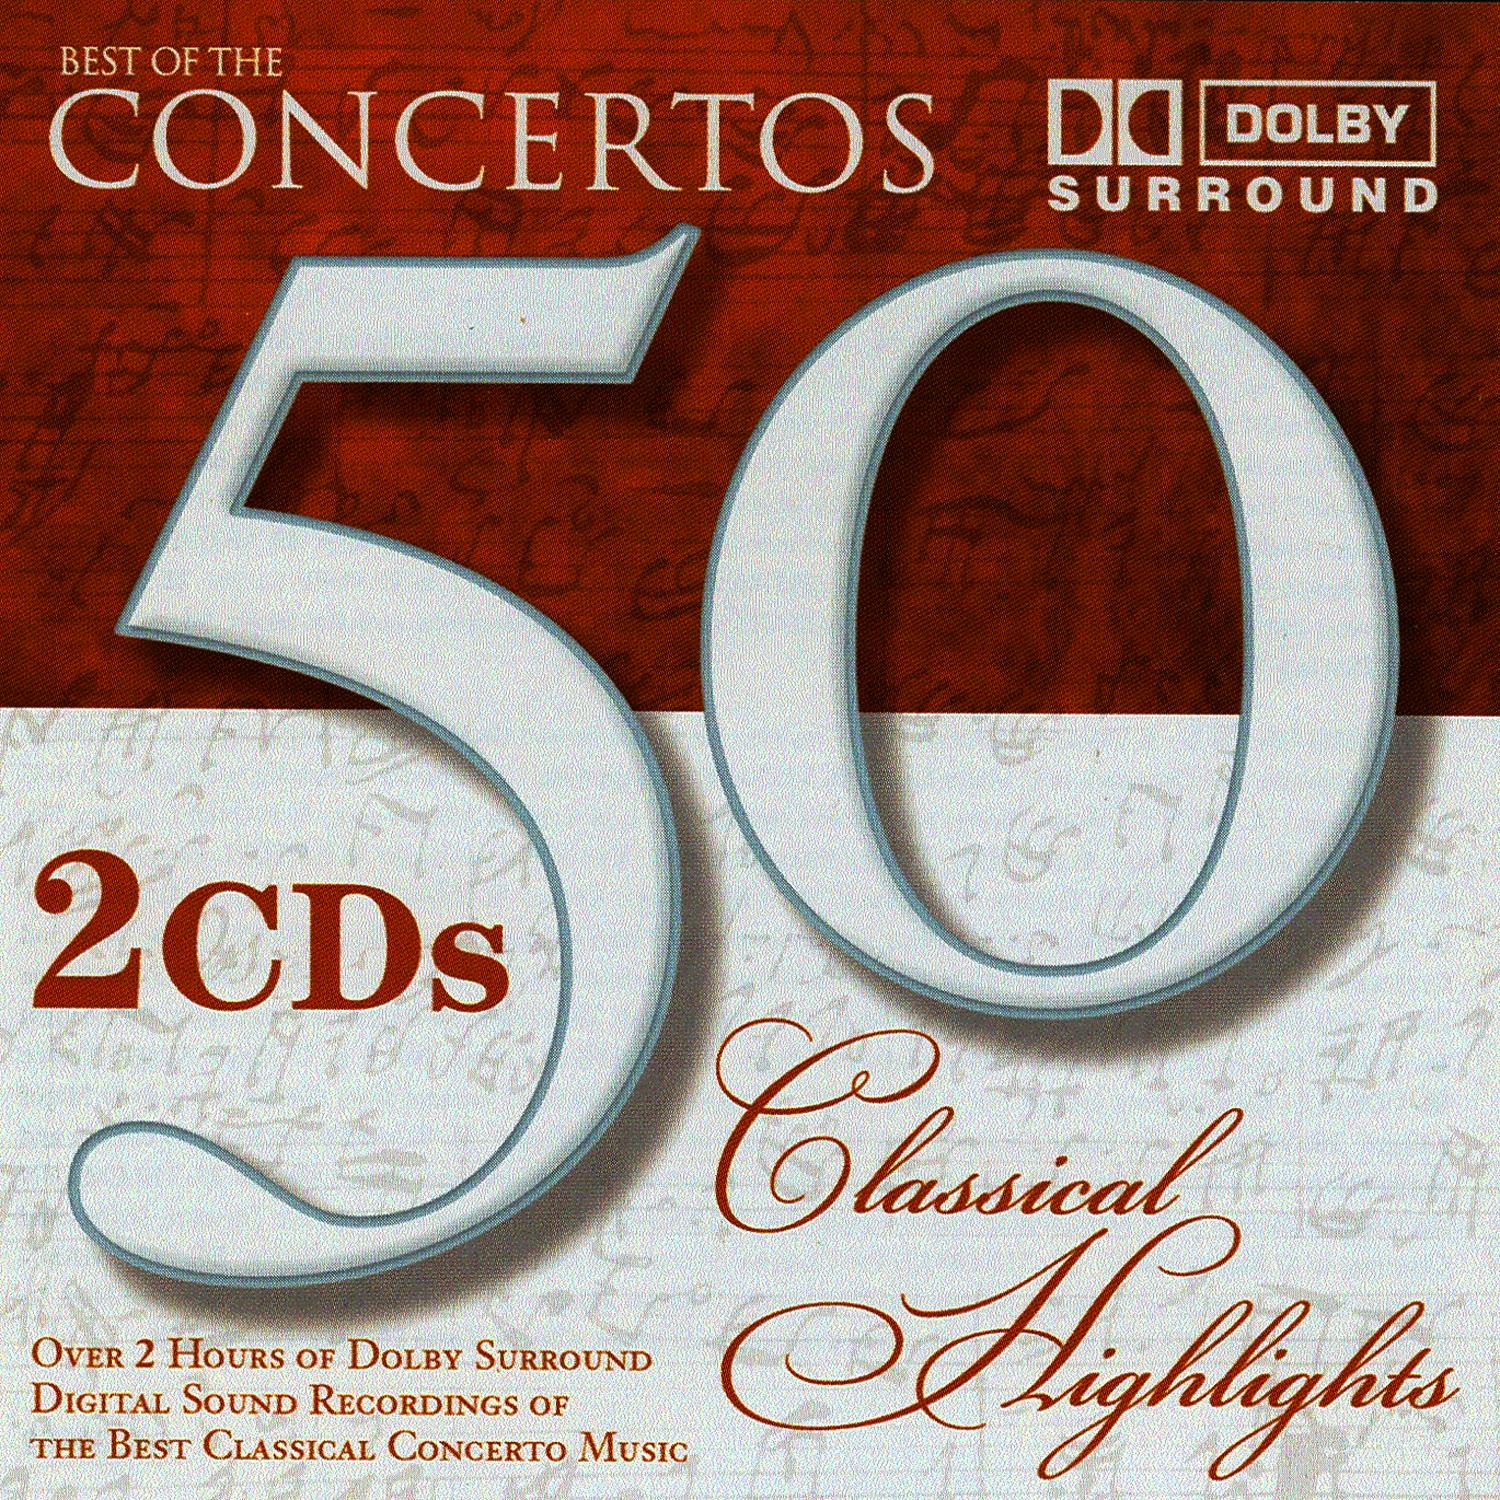 Concerto For String Orchestra and Harpsichord in G Major  - Allegro